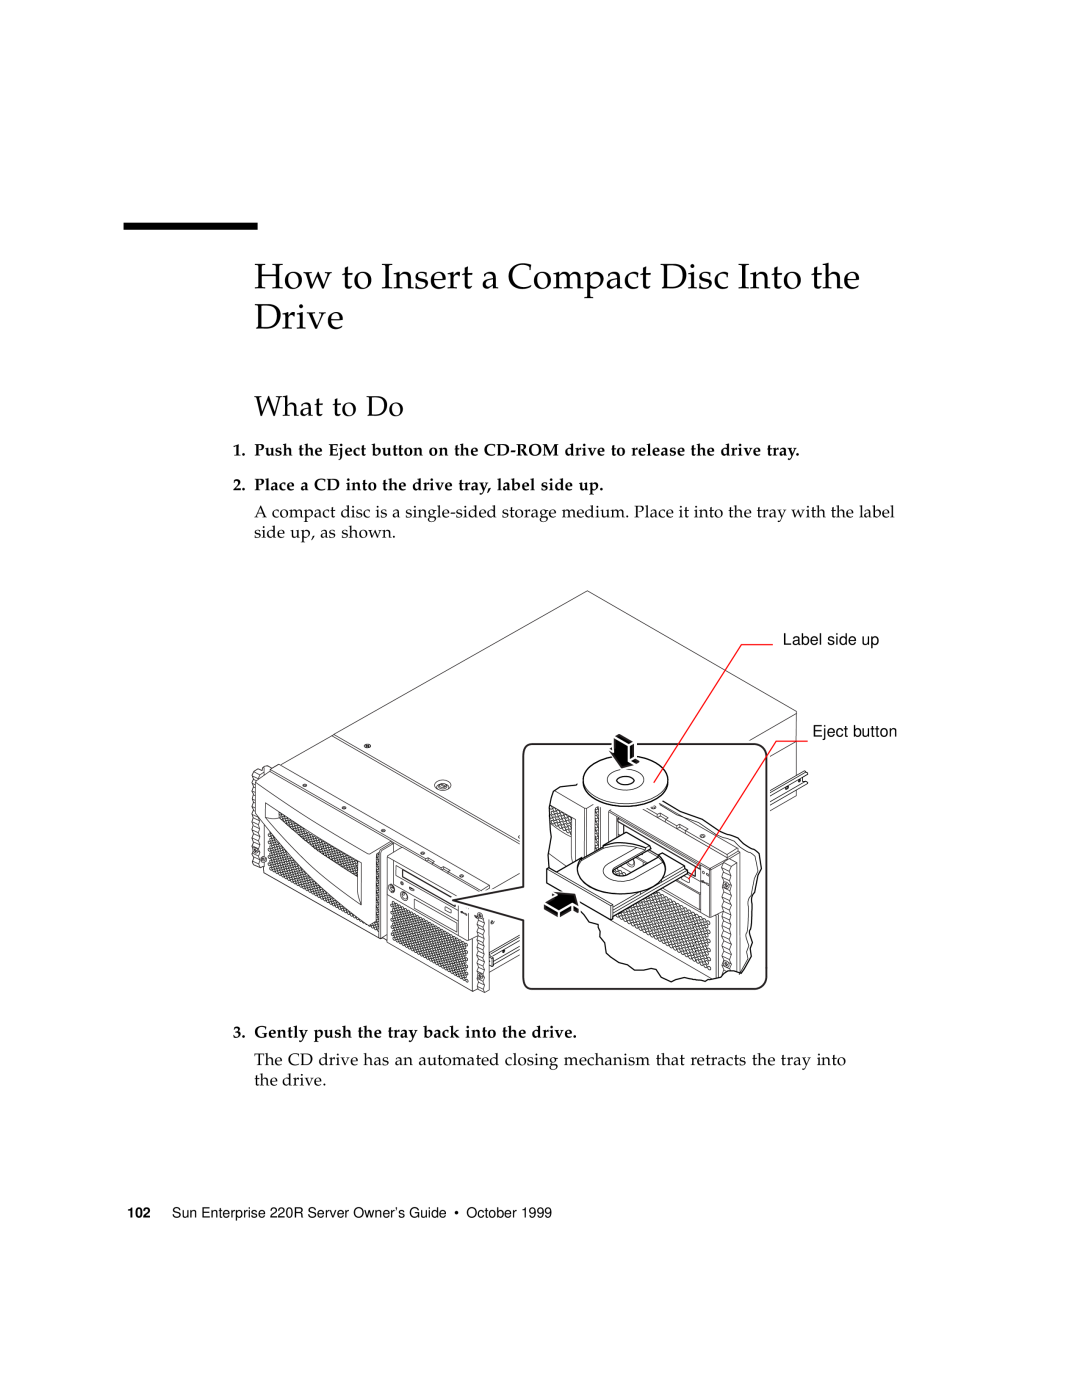 Sun Microsystems 220R manual How to Insert a Compact Disc Into the Drive, Place a CD into the drive tray, label side up 